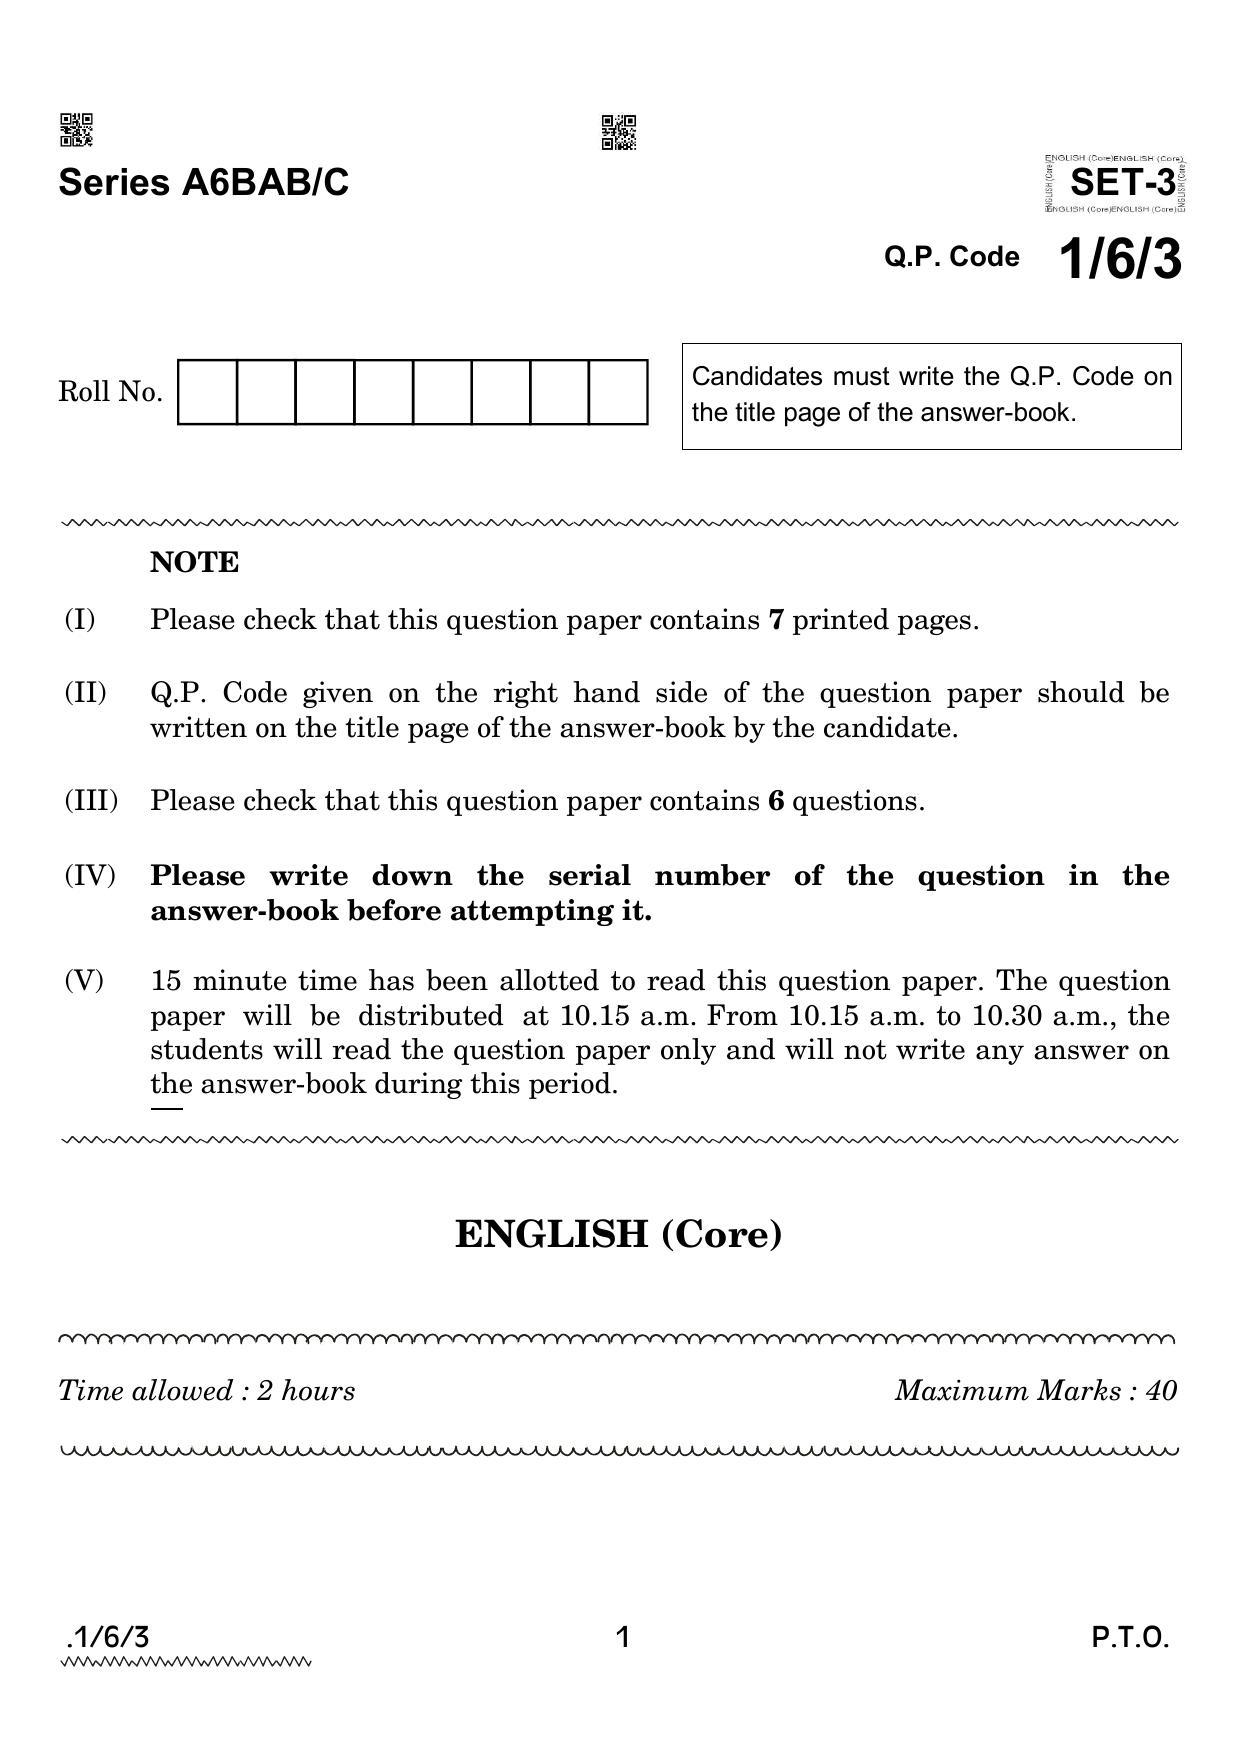 CBSE Class 12 1-6-3 ENGLISH CORE 2022 Compartment Question Paper - Page 1